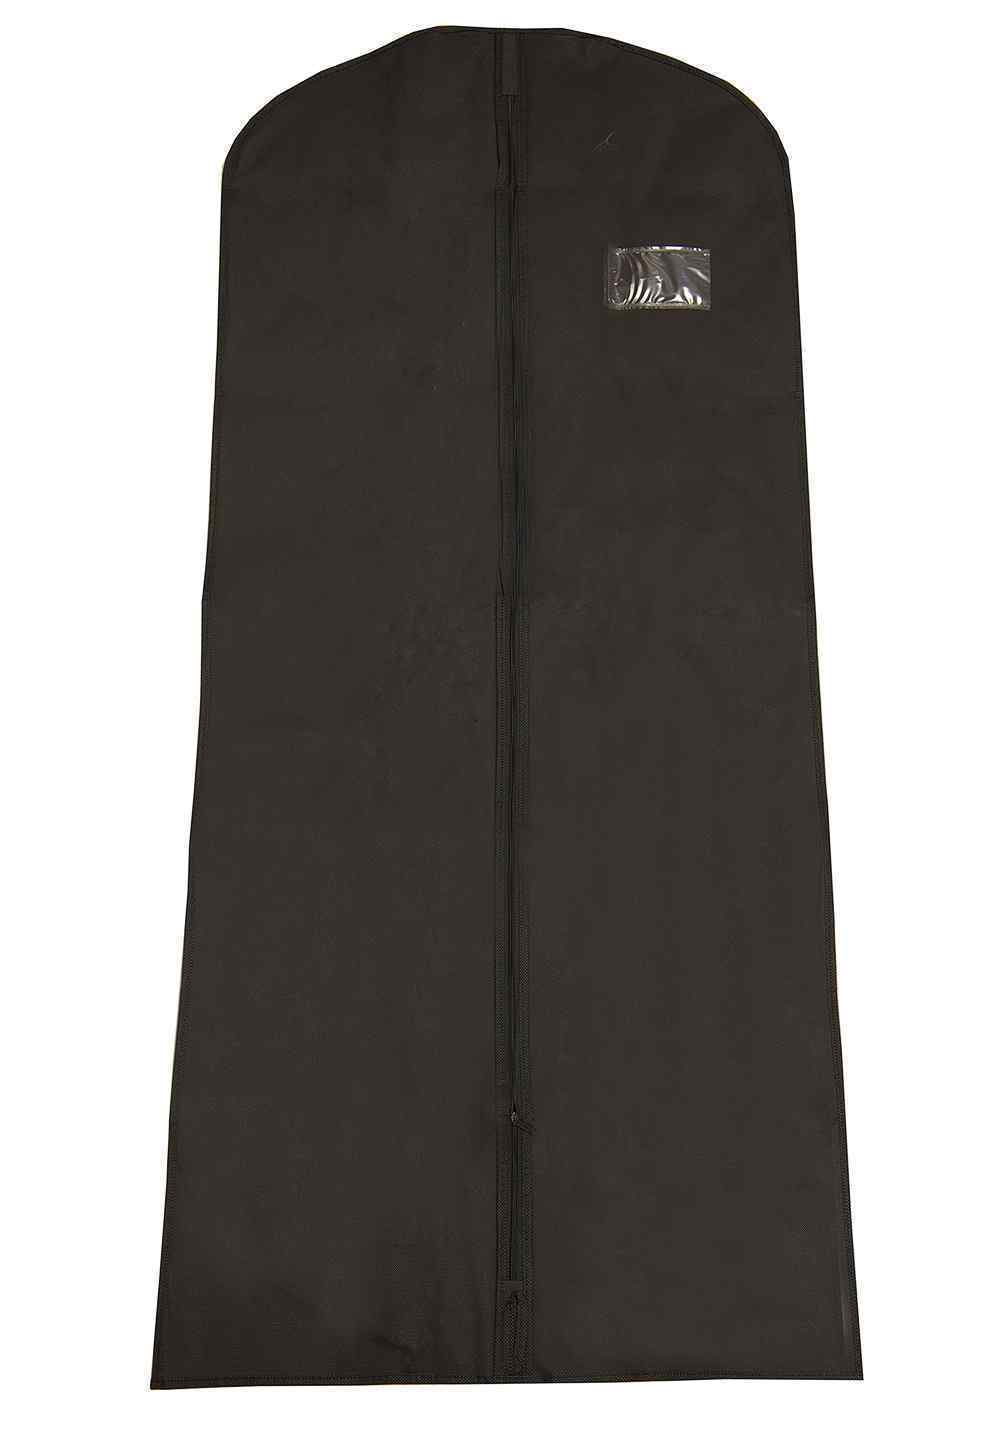 Retail Dress Covers "NW" BLACK (12)